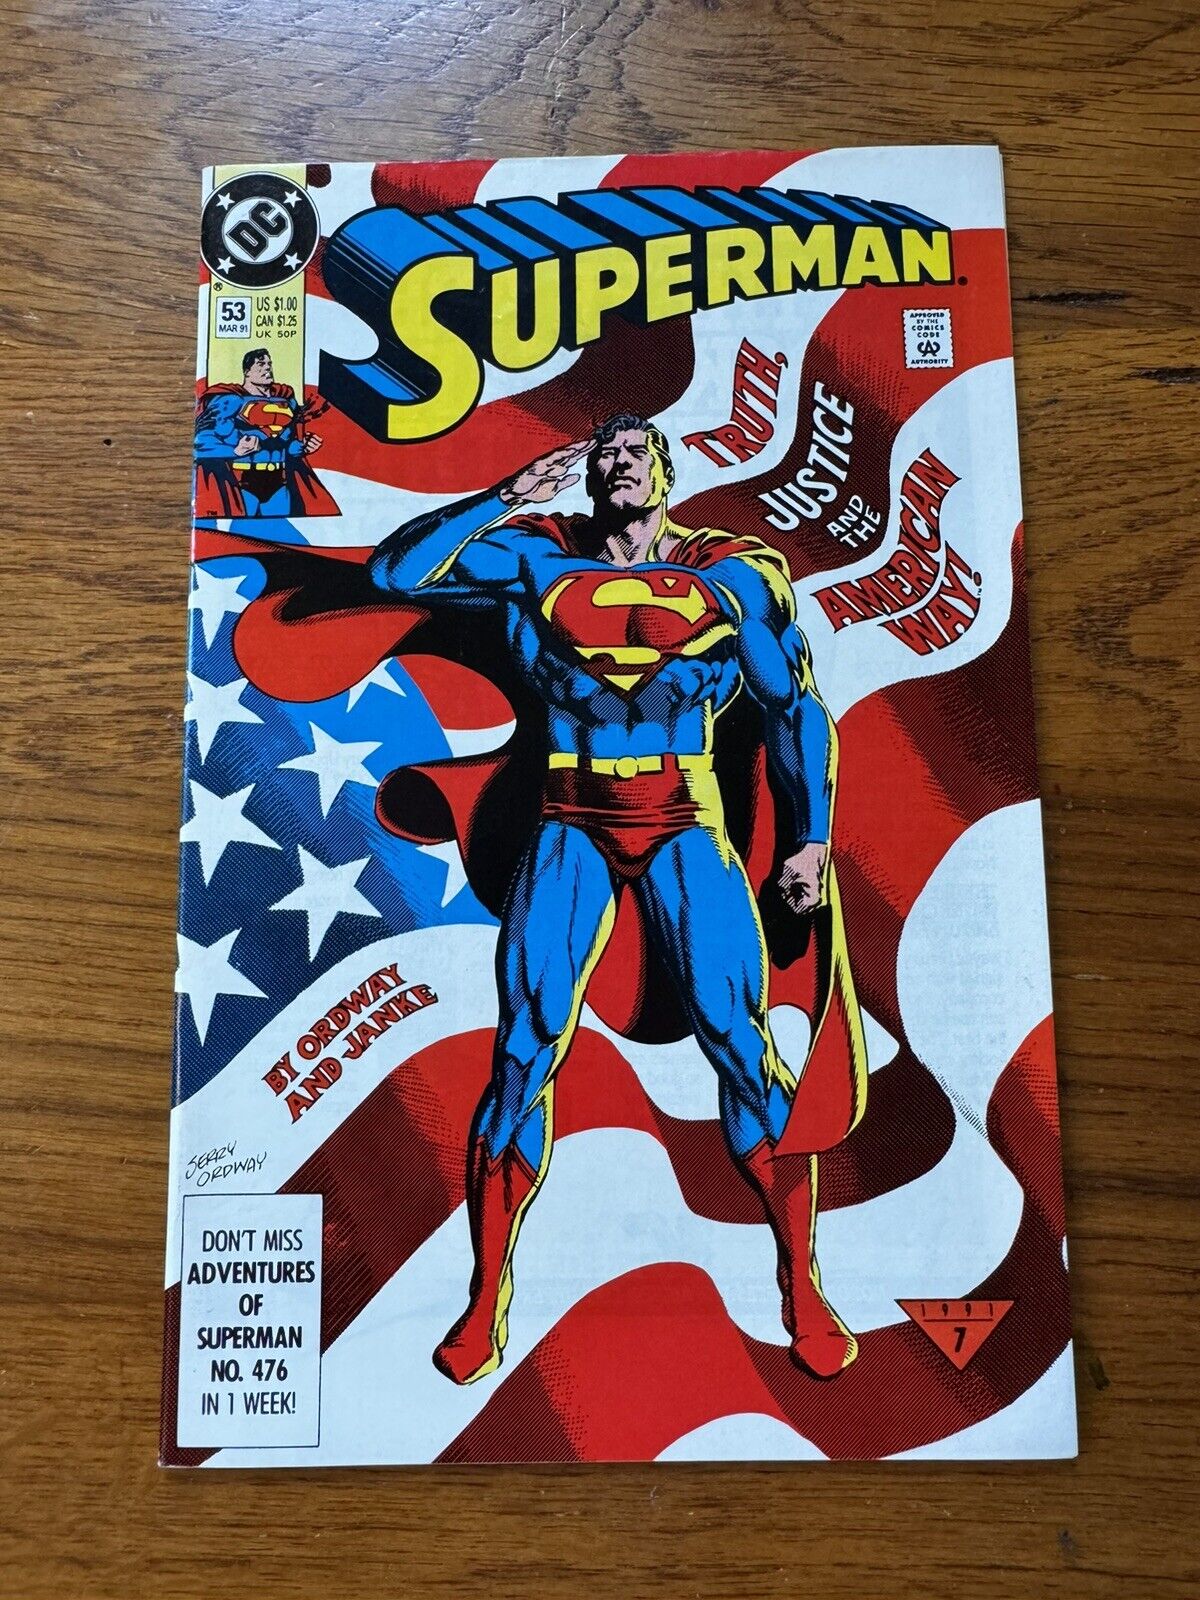 SUPERMAN #53 (DC/1991/TRUTH JUSTICE AND THE AMERICAN WAY